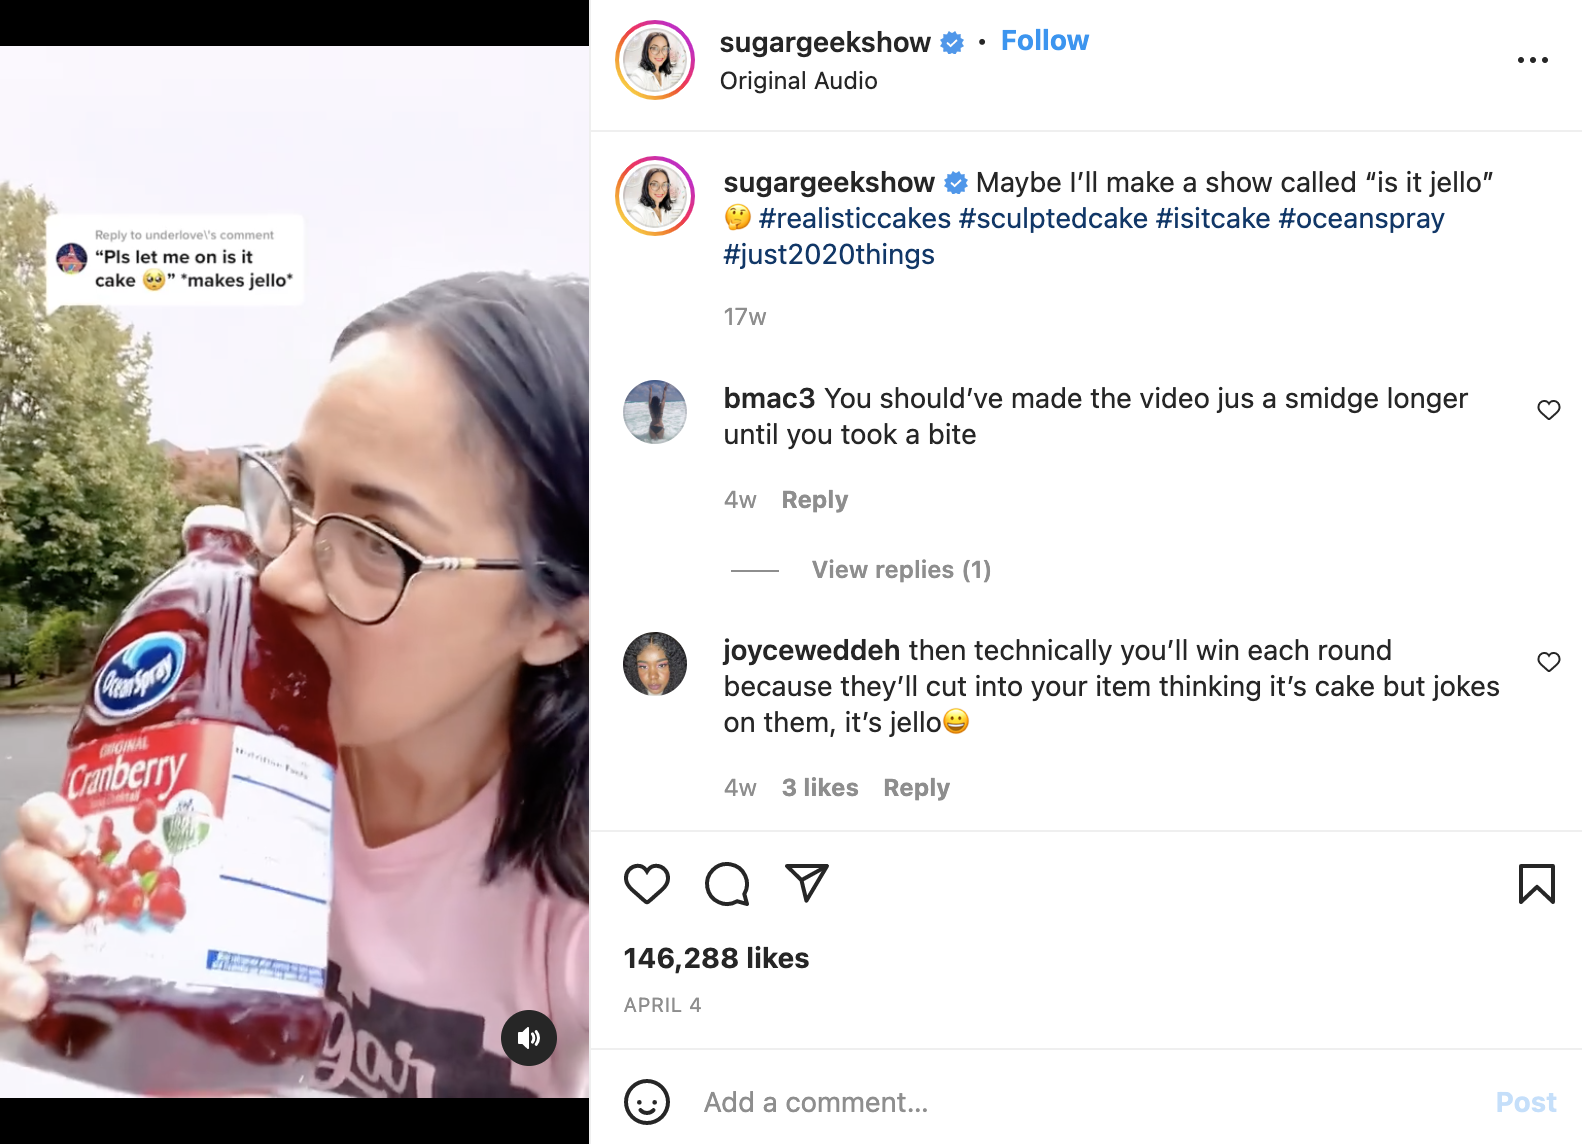 Sugar Geek Show viral content for startup bakery business